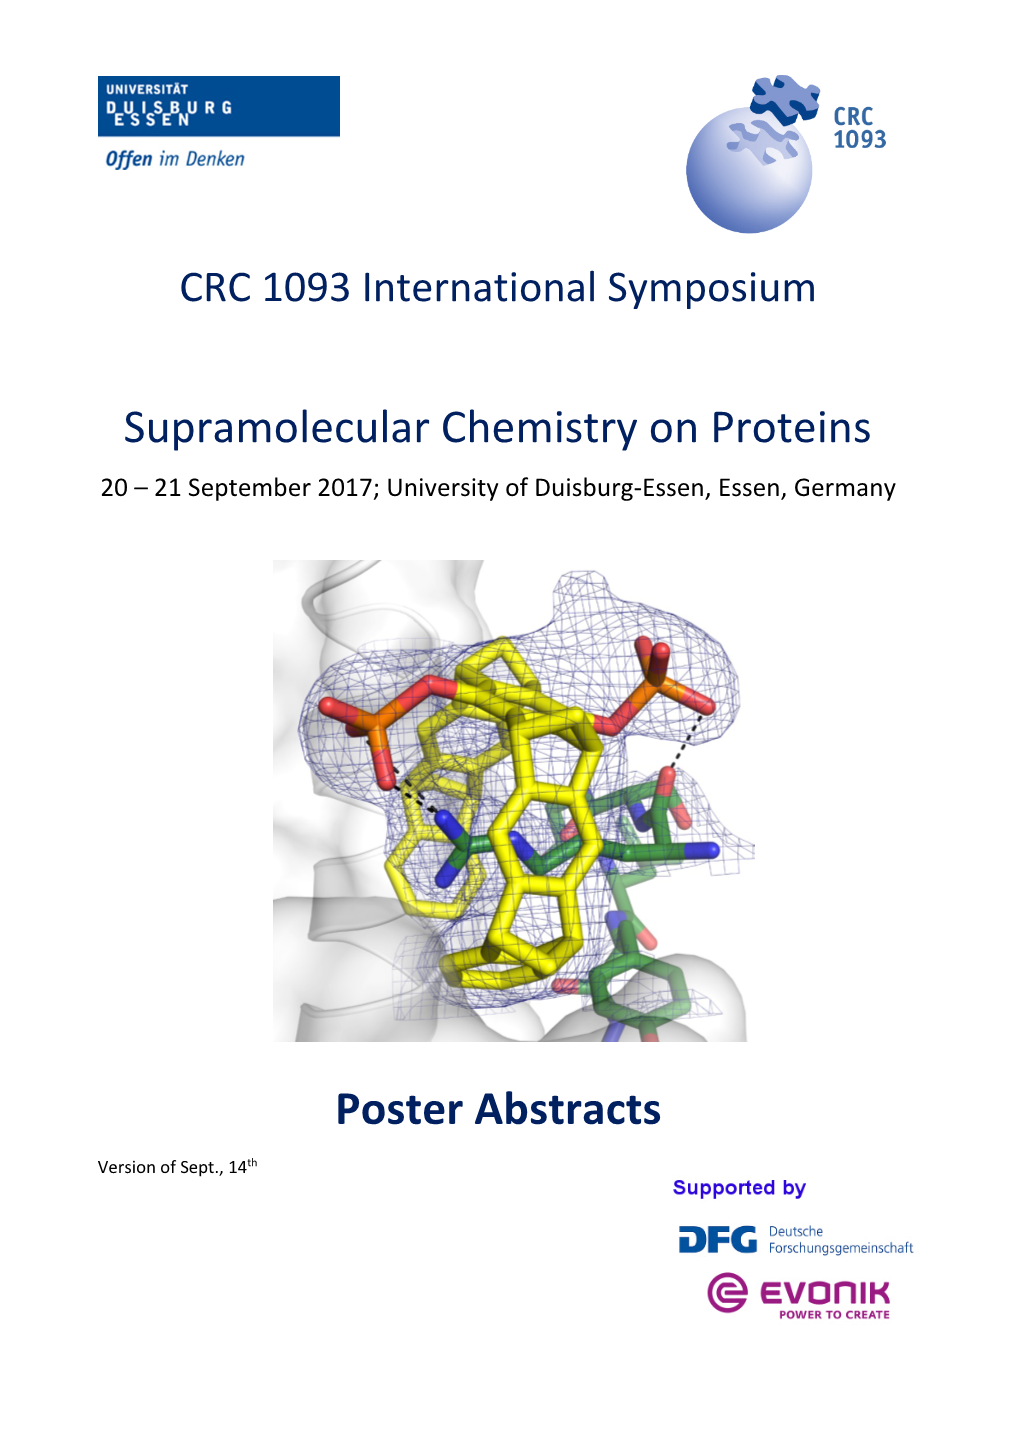 Supramolecular Chemistry on Proteins Poster Abstracts